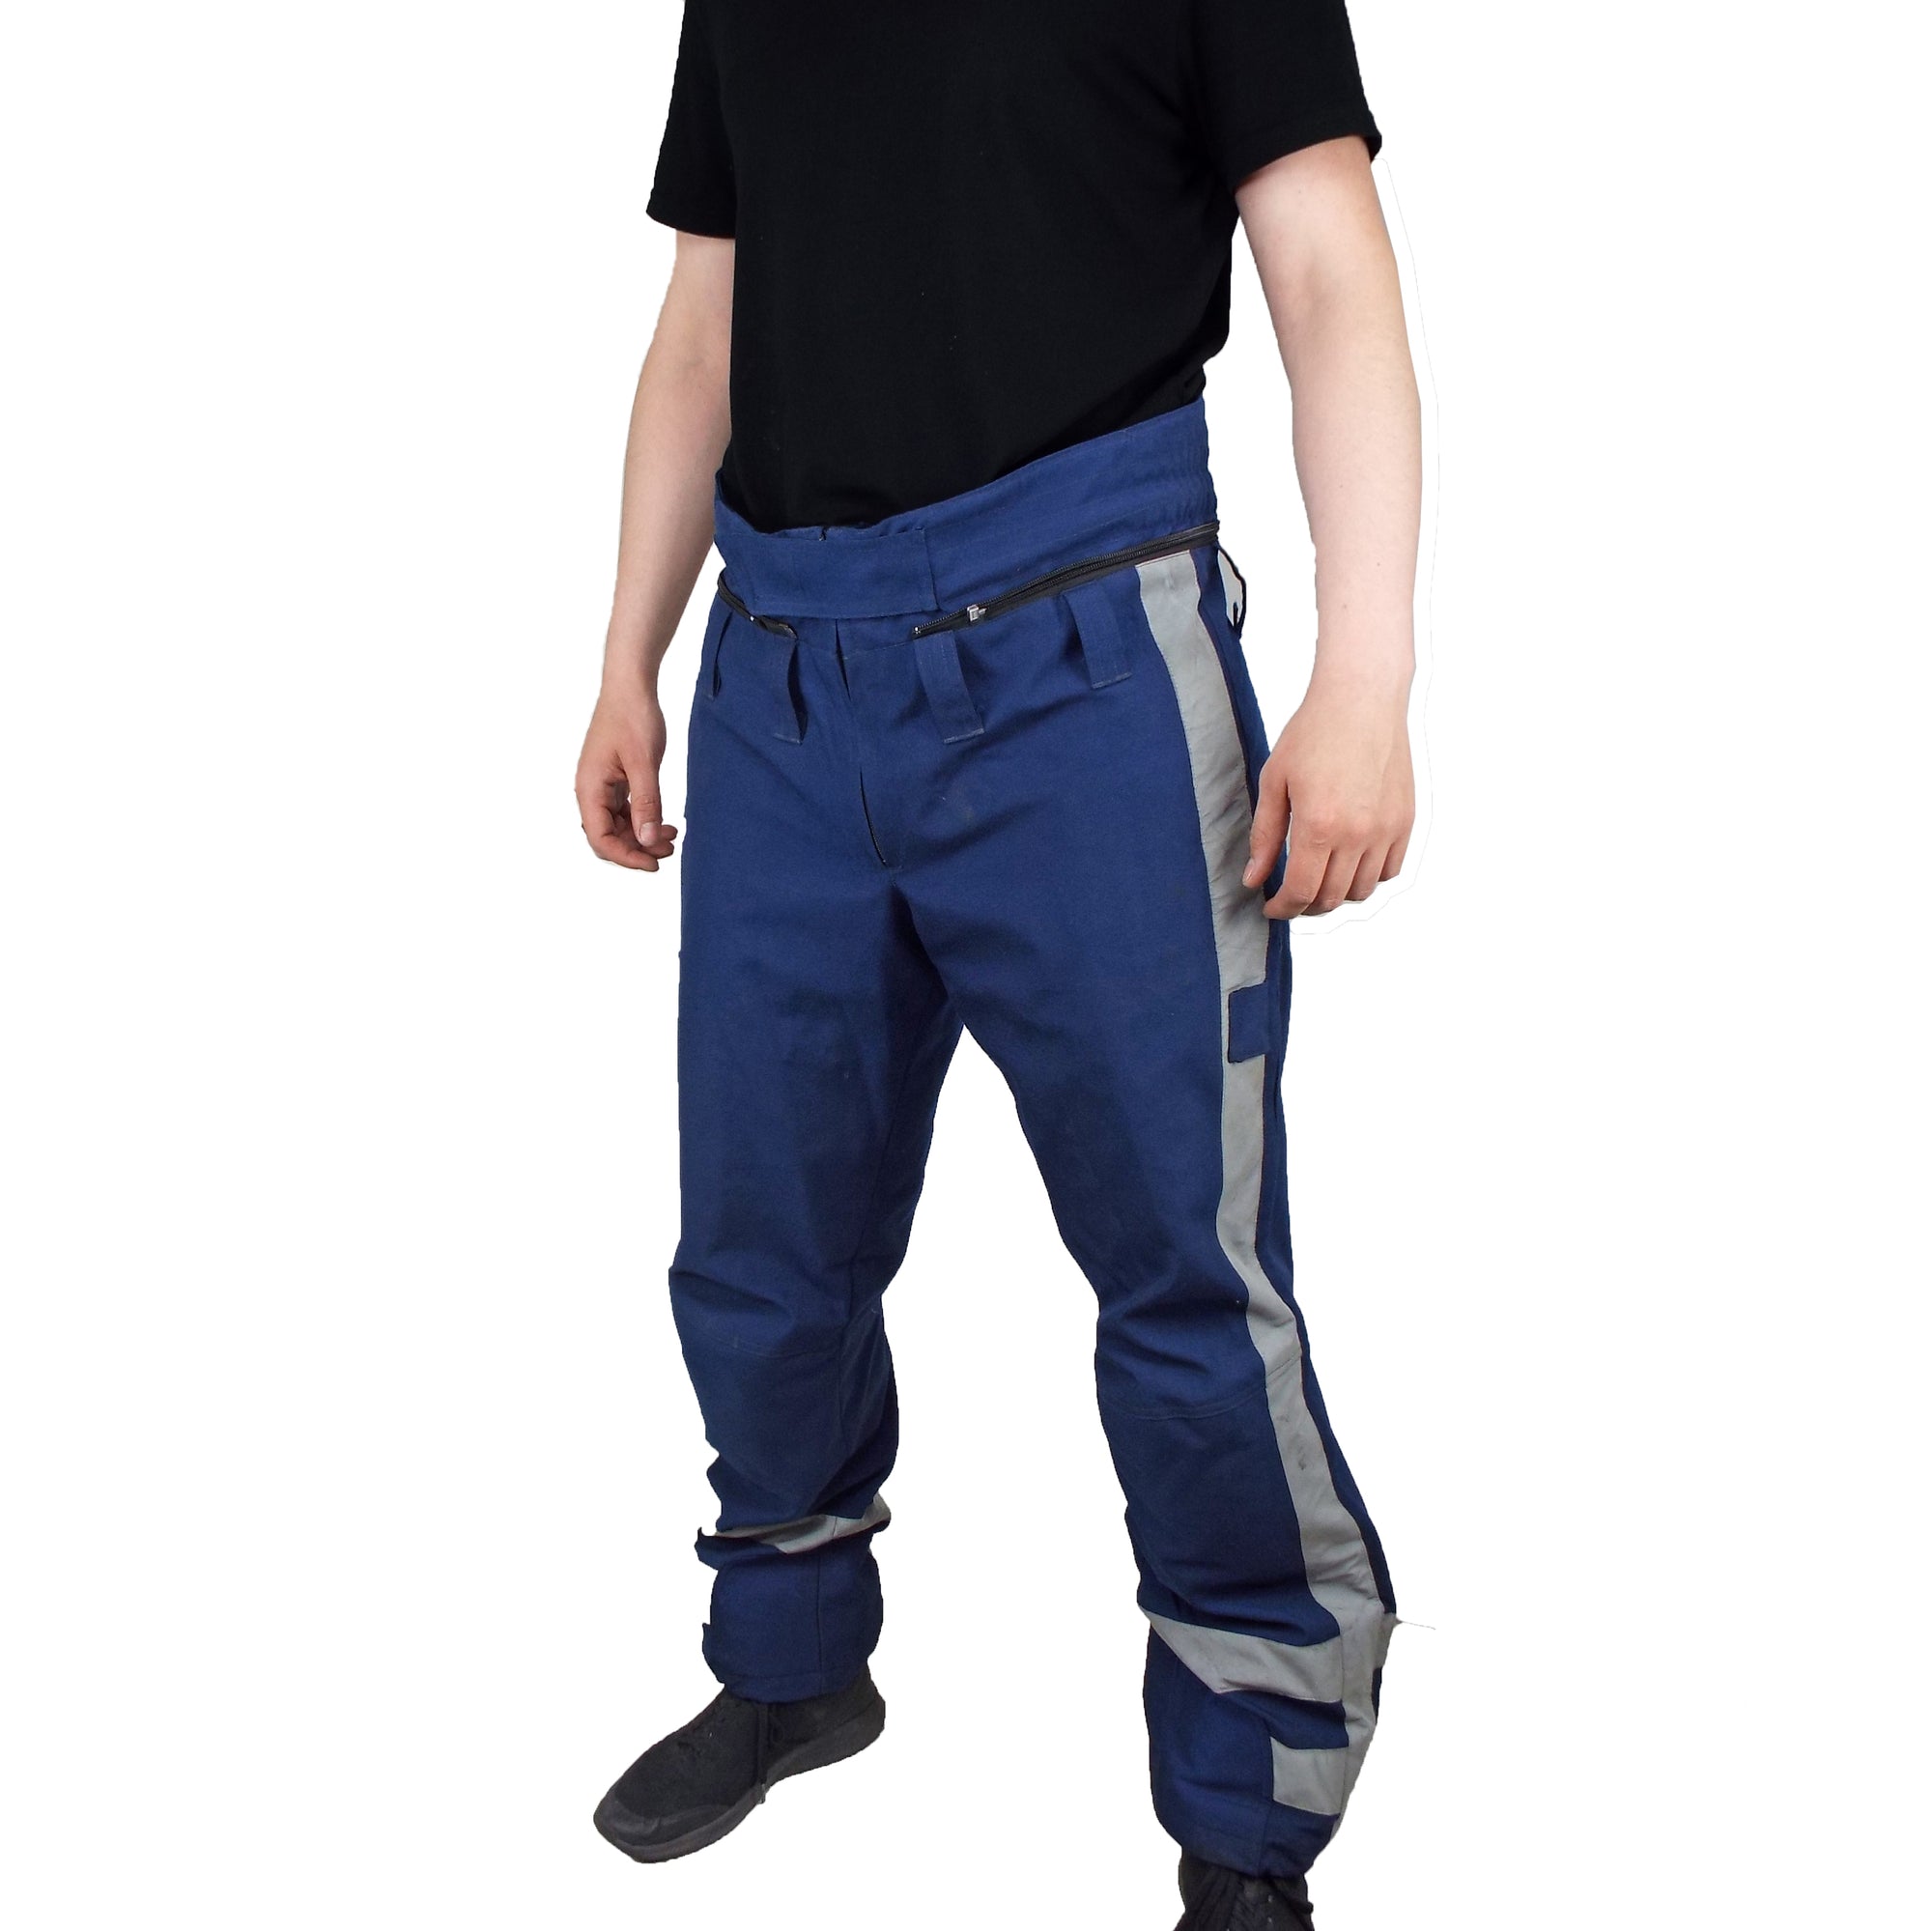 Dutch Military - Blue Motorcycle Trousers - Grade 1